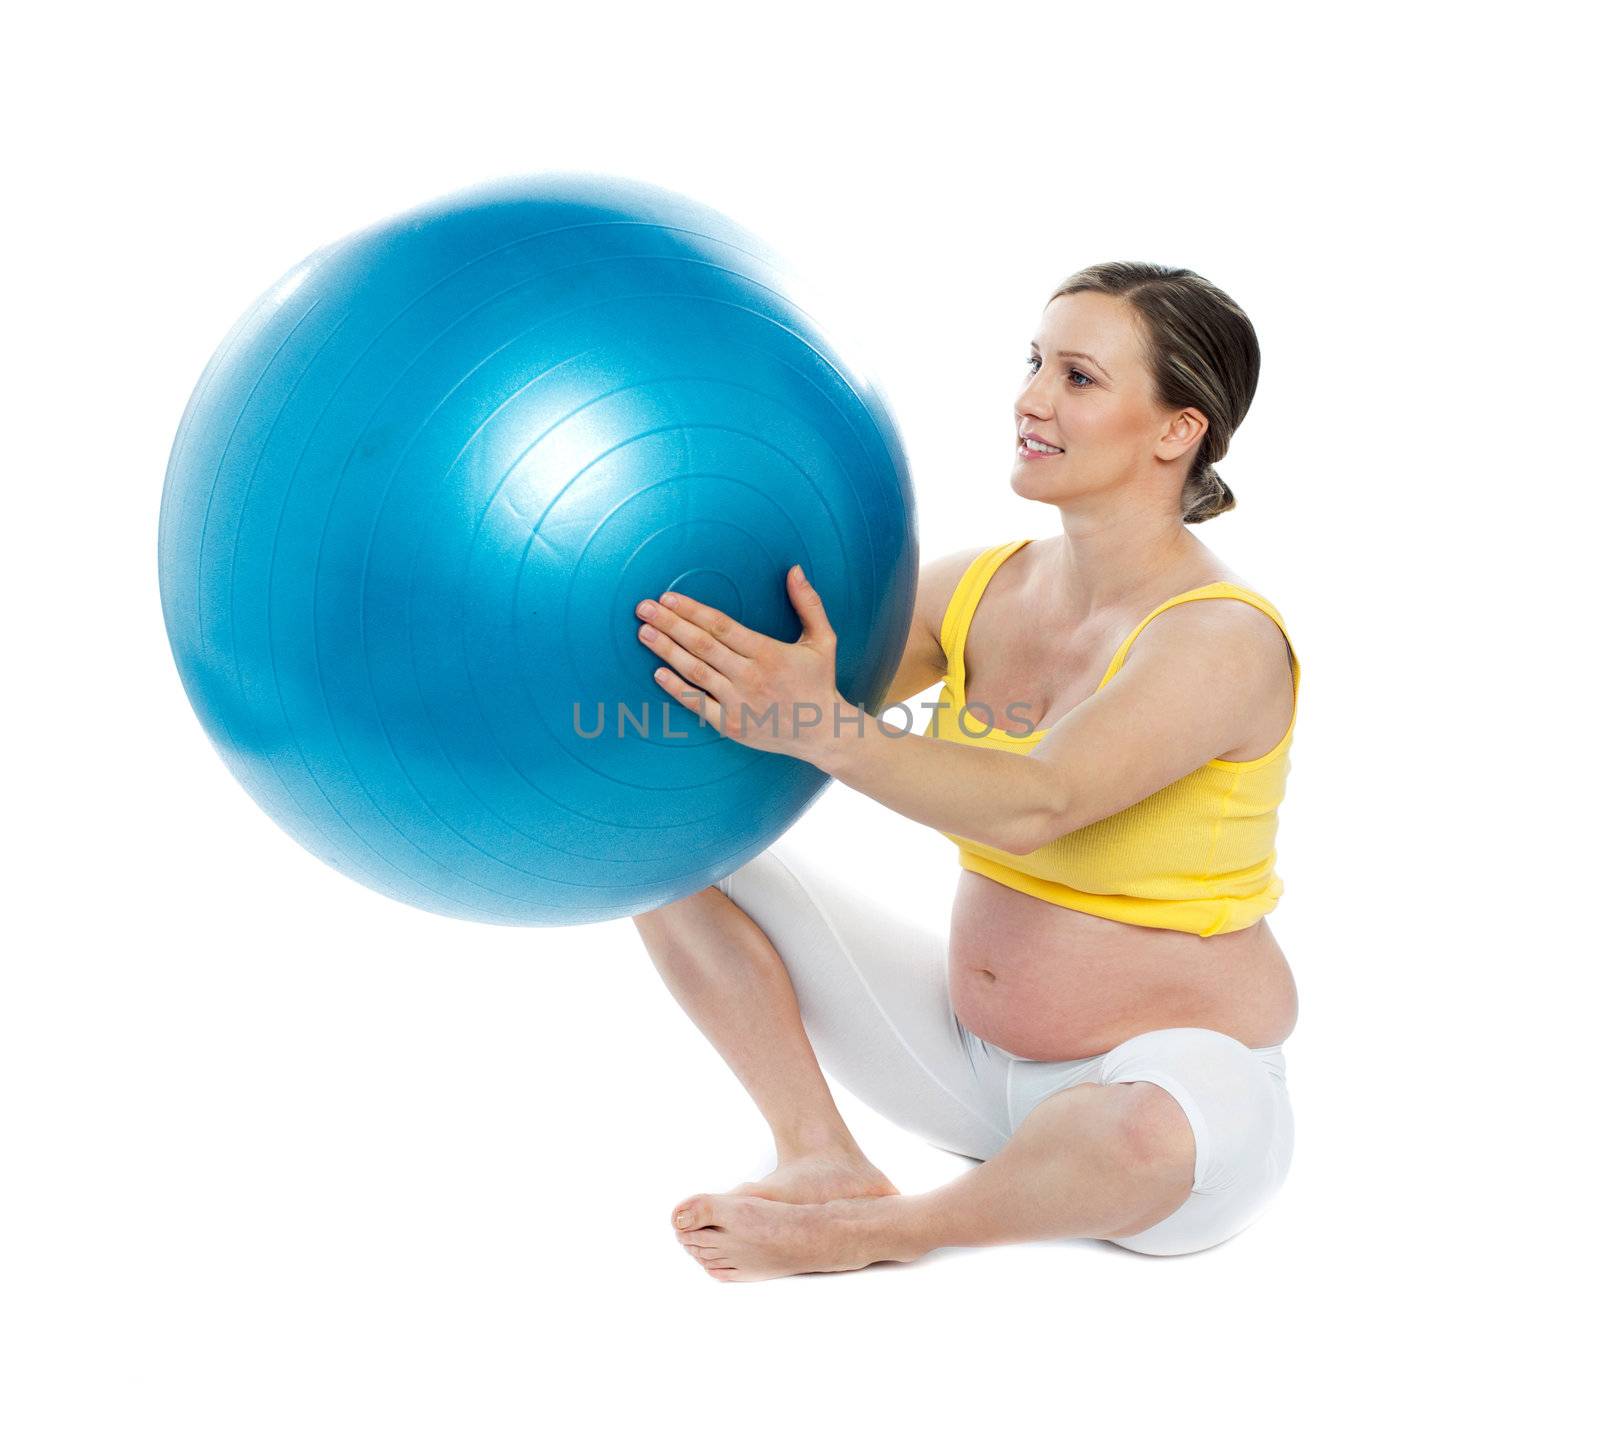 Pregnant woman excercises with a gymnastic ball isolated on white background